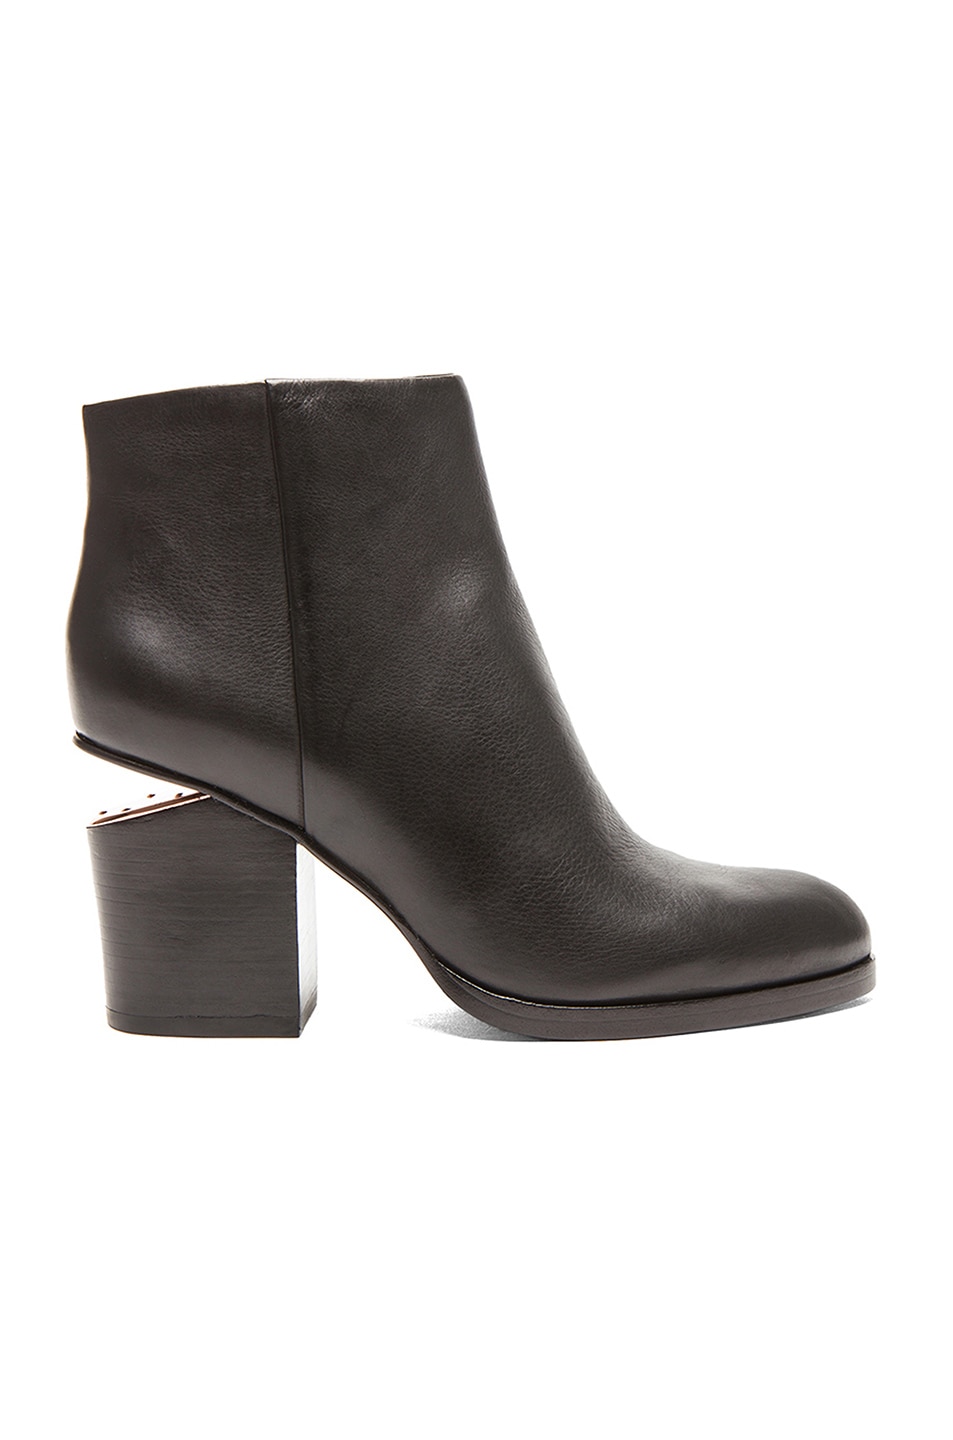 Image 1 of Alexander Wang Gabi Ankle Booties with Rose Gold Hardware in Black